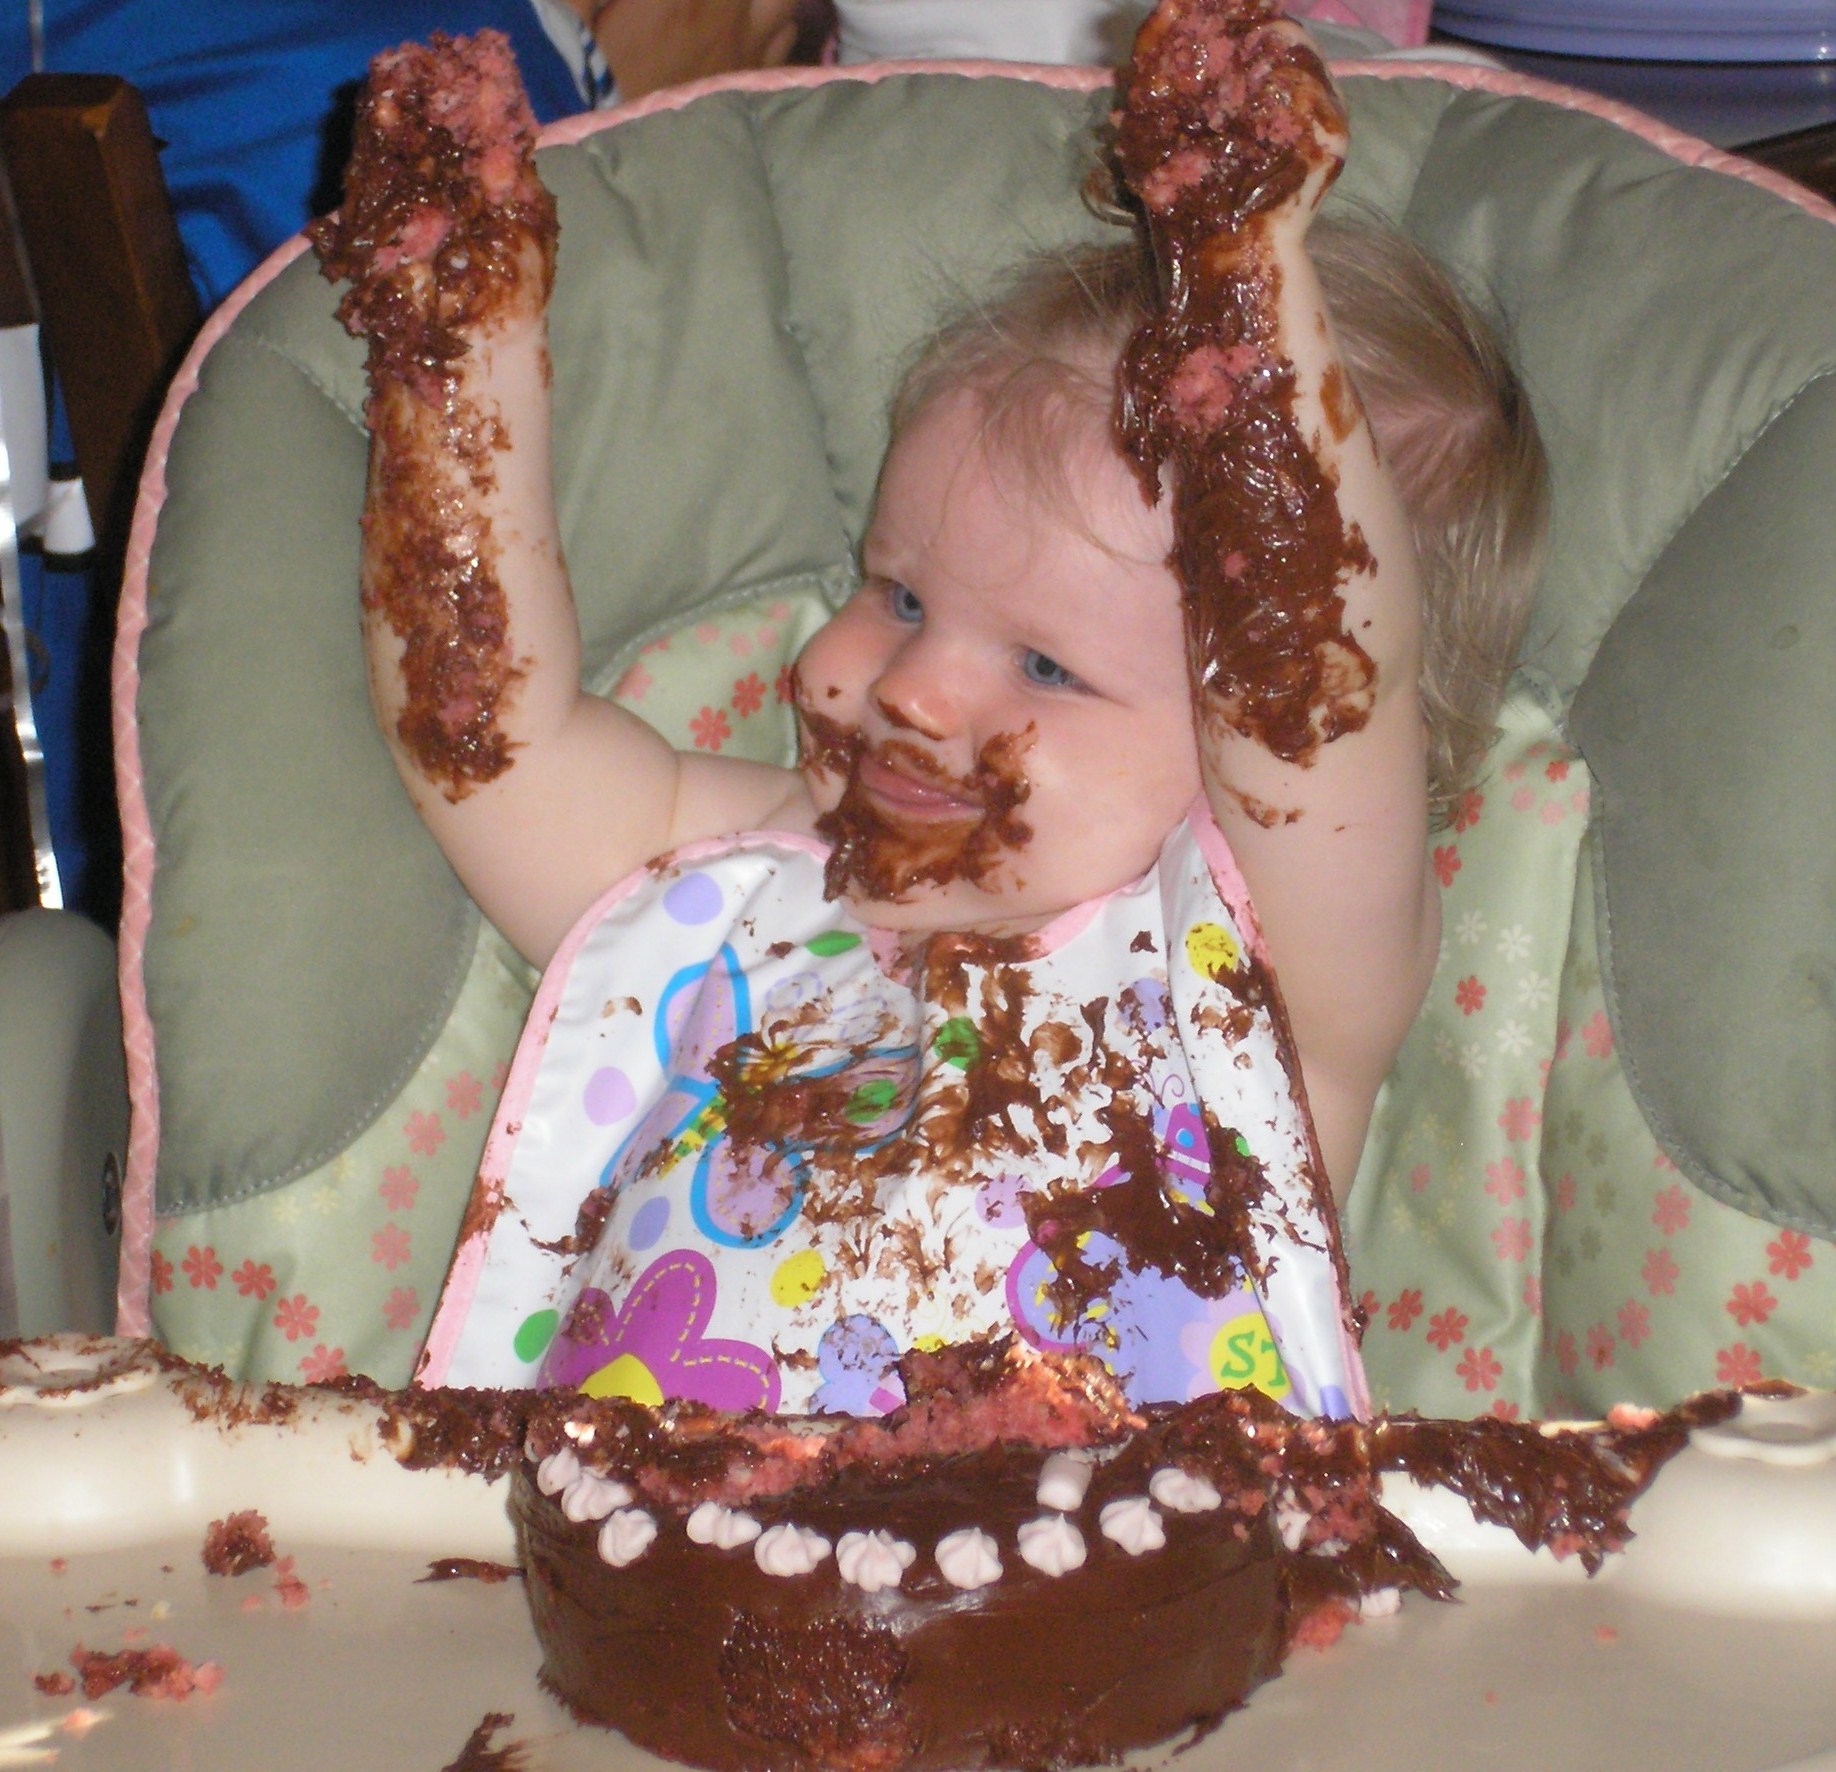 Our daughter after her 1st birthday chocolate feast (she's a girl after her Mama's heart!)